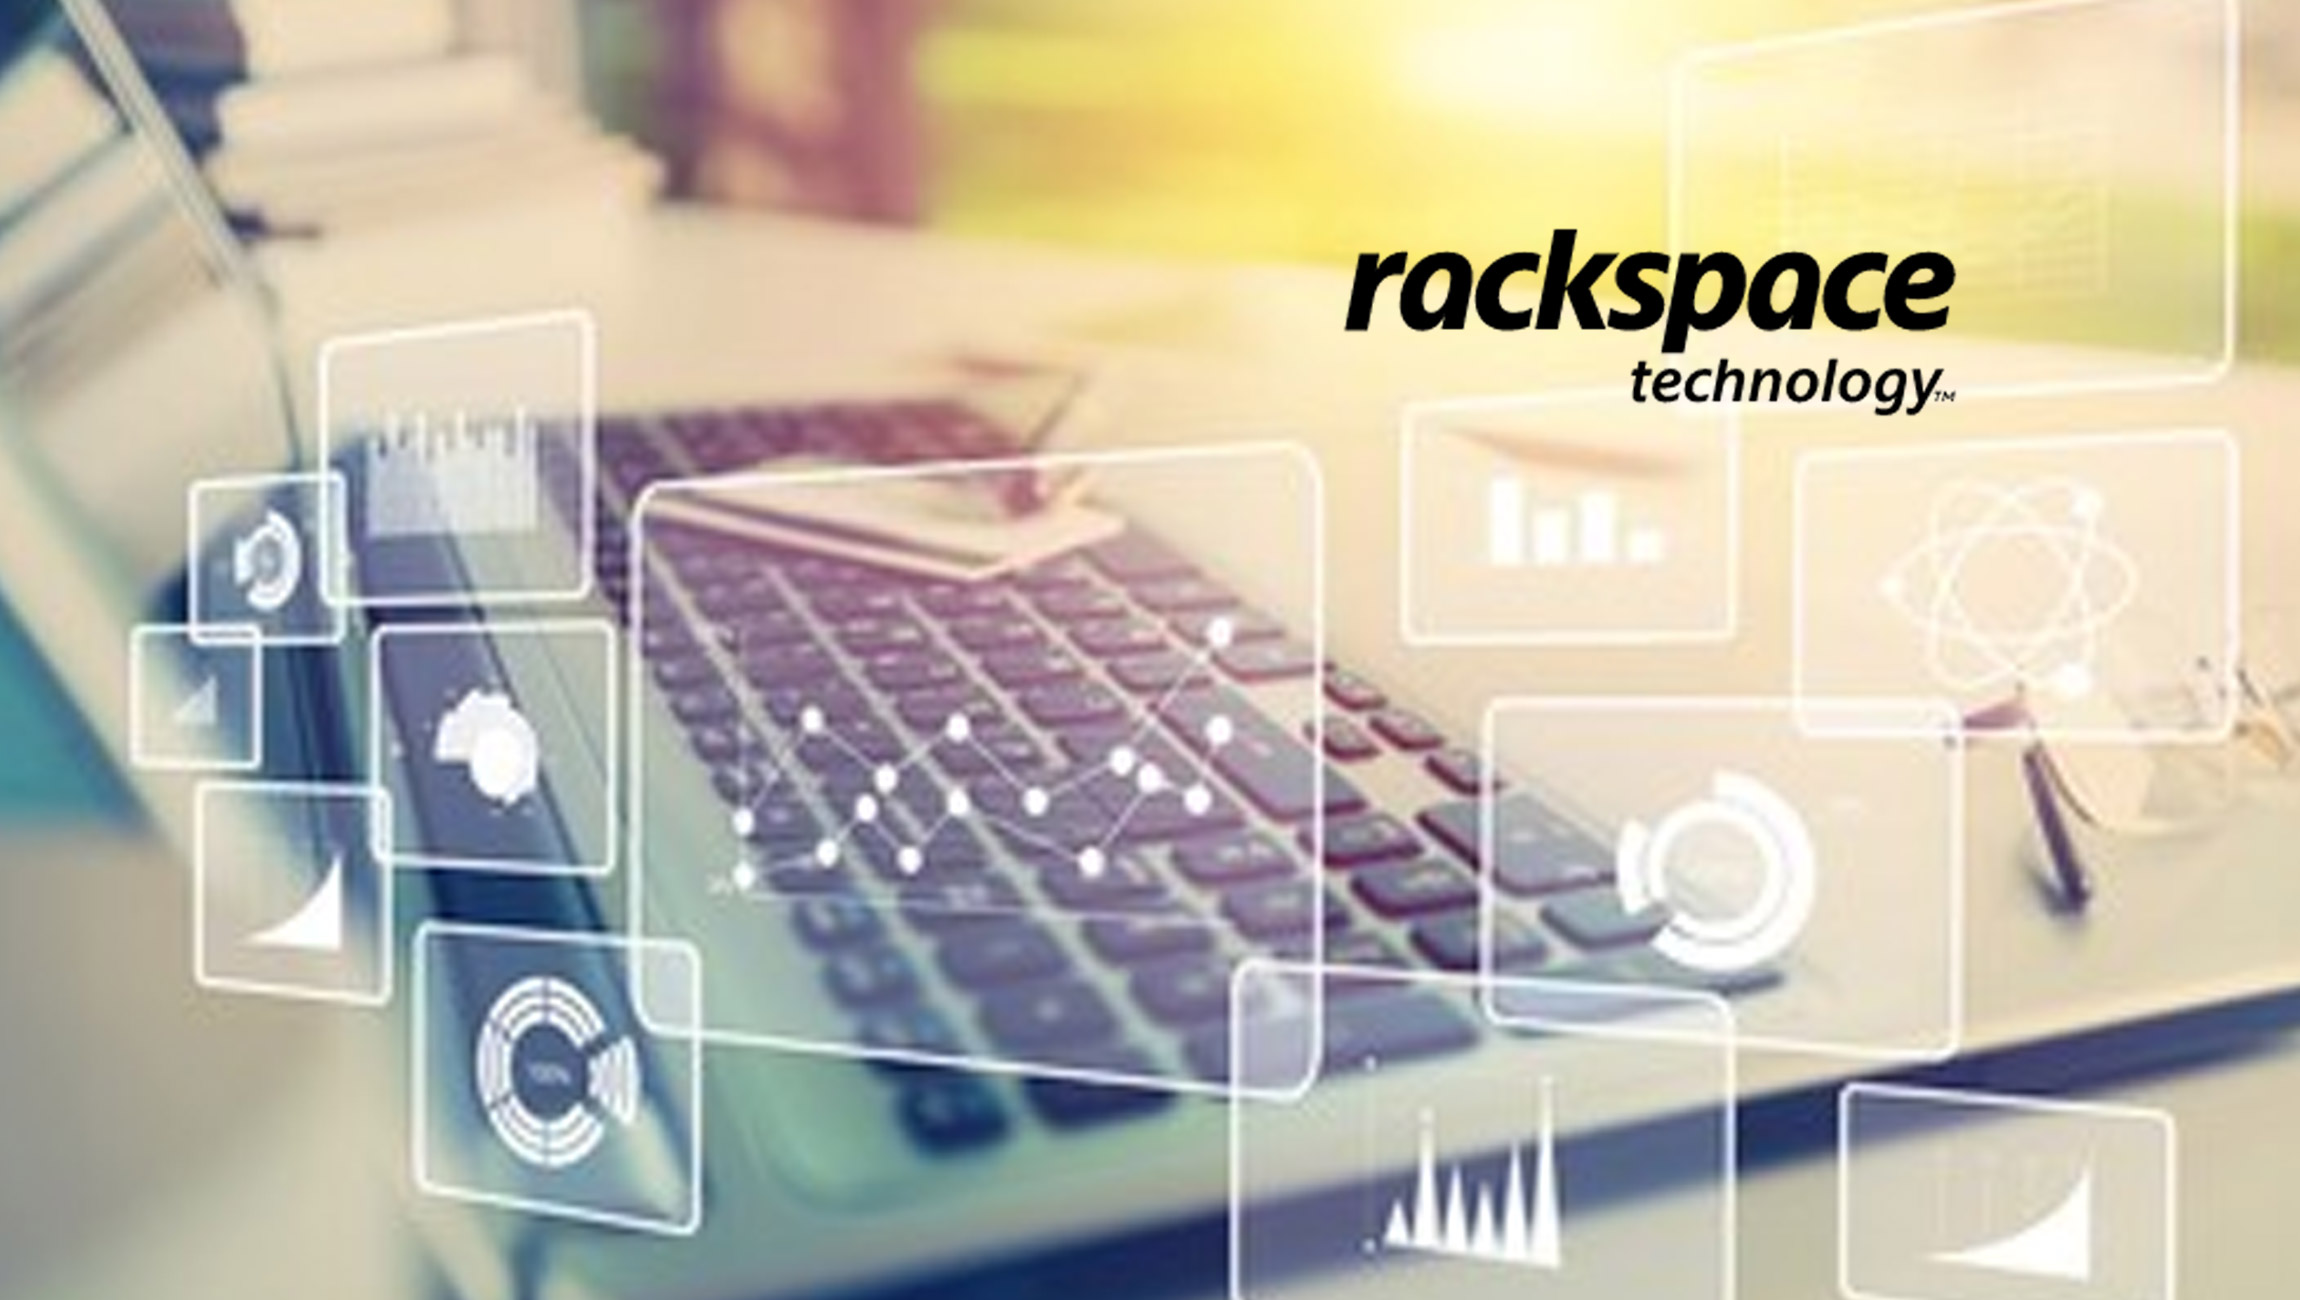 Rackspace Technology Launches Beyond Clouds Campaign Emphasizing Its Services Capabilities and Targeting C-Level Decision Makers